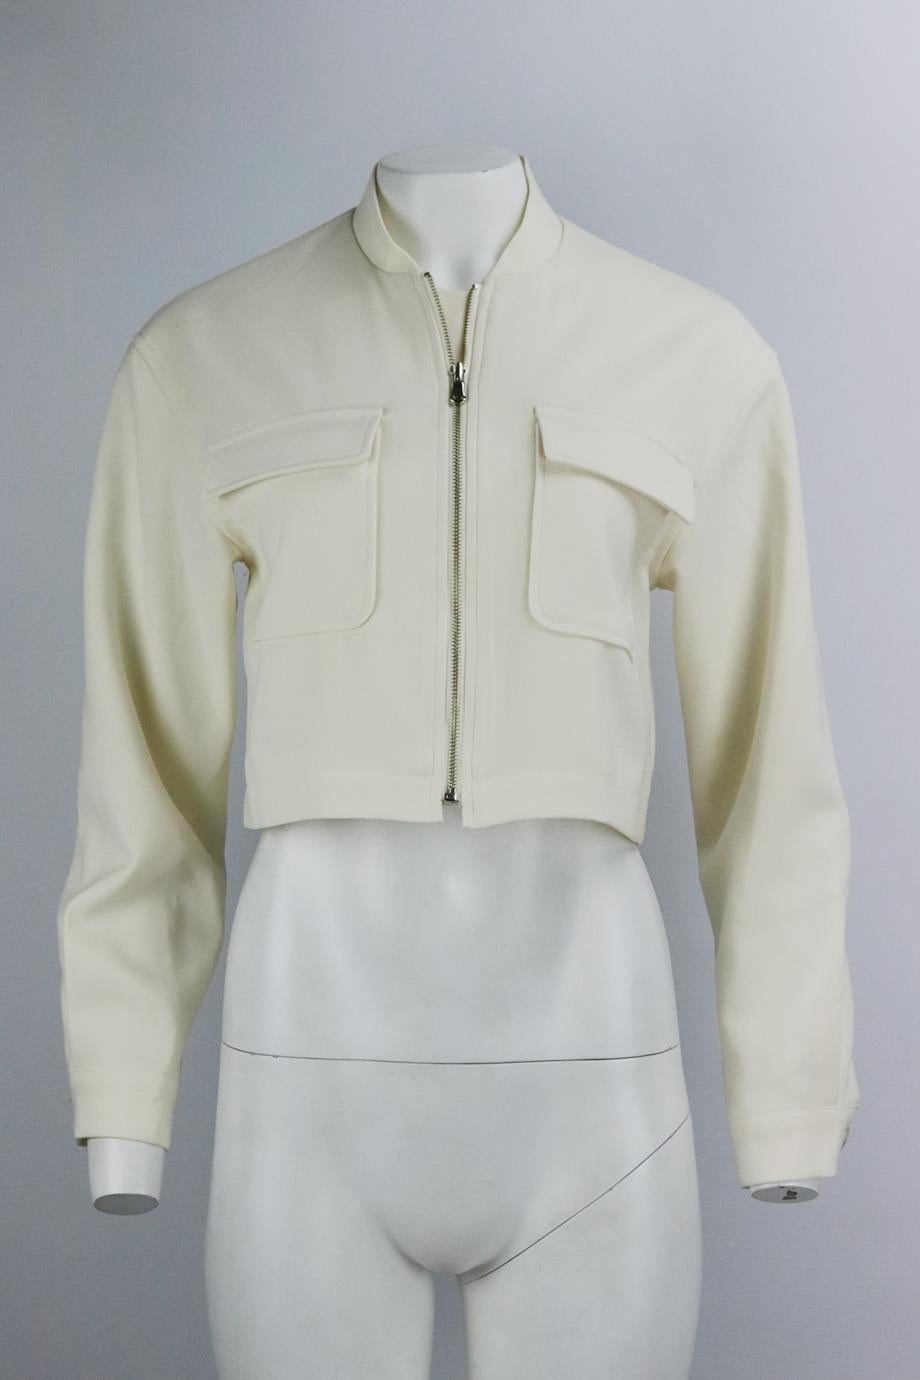 Marcéla London cropped twill bomber jacket. White. Long sleeve, v-neck. Zip fastening at front. 97% Polyester, 3% spandex. Size: One Size. Shoulder to shoulder: 18.2 in. Bust: 40.4 in. Waist: 41 in. Length: 17 in
